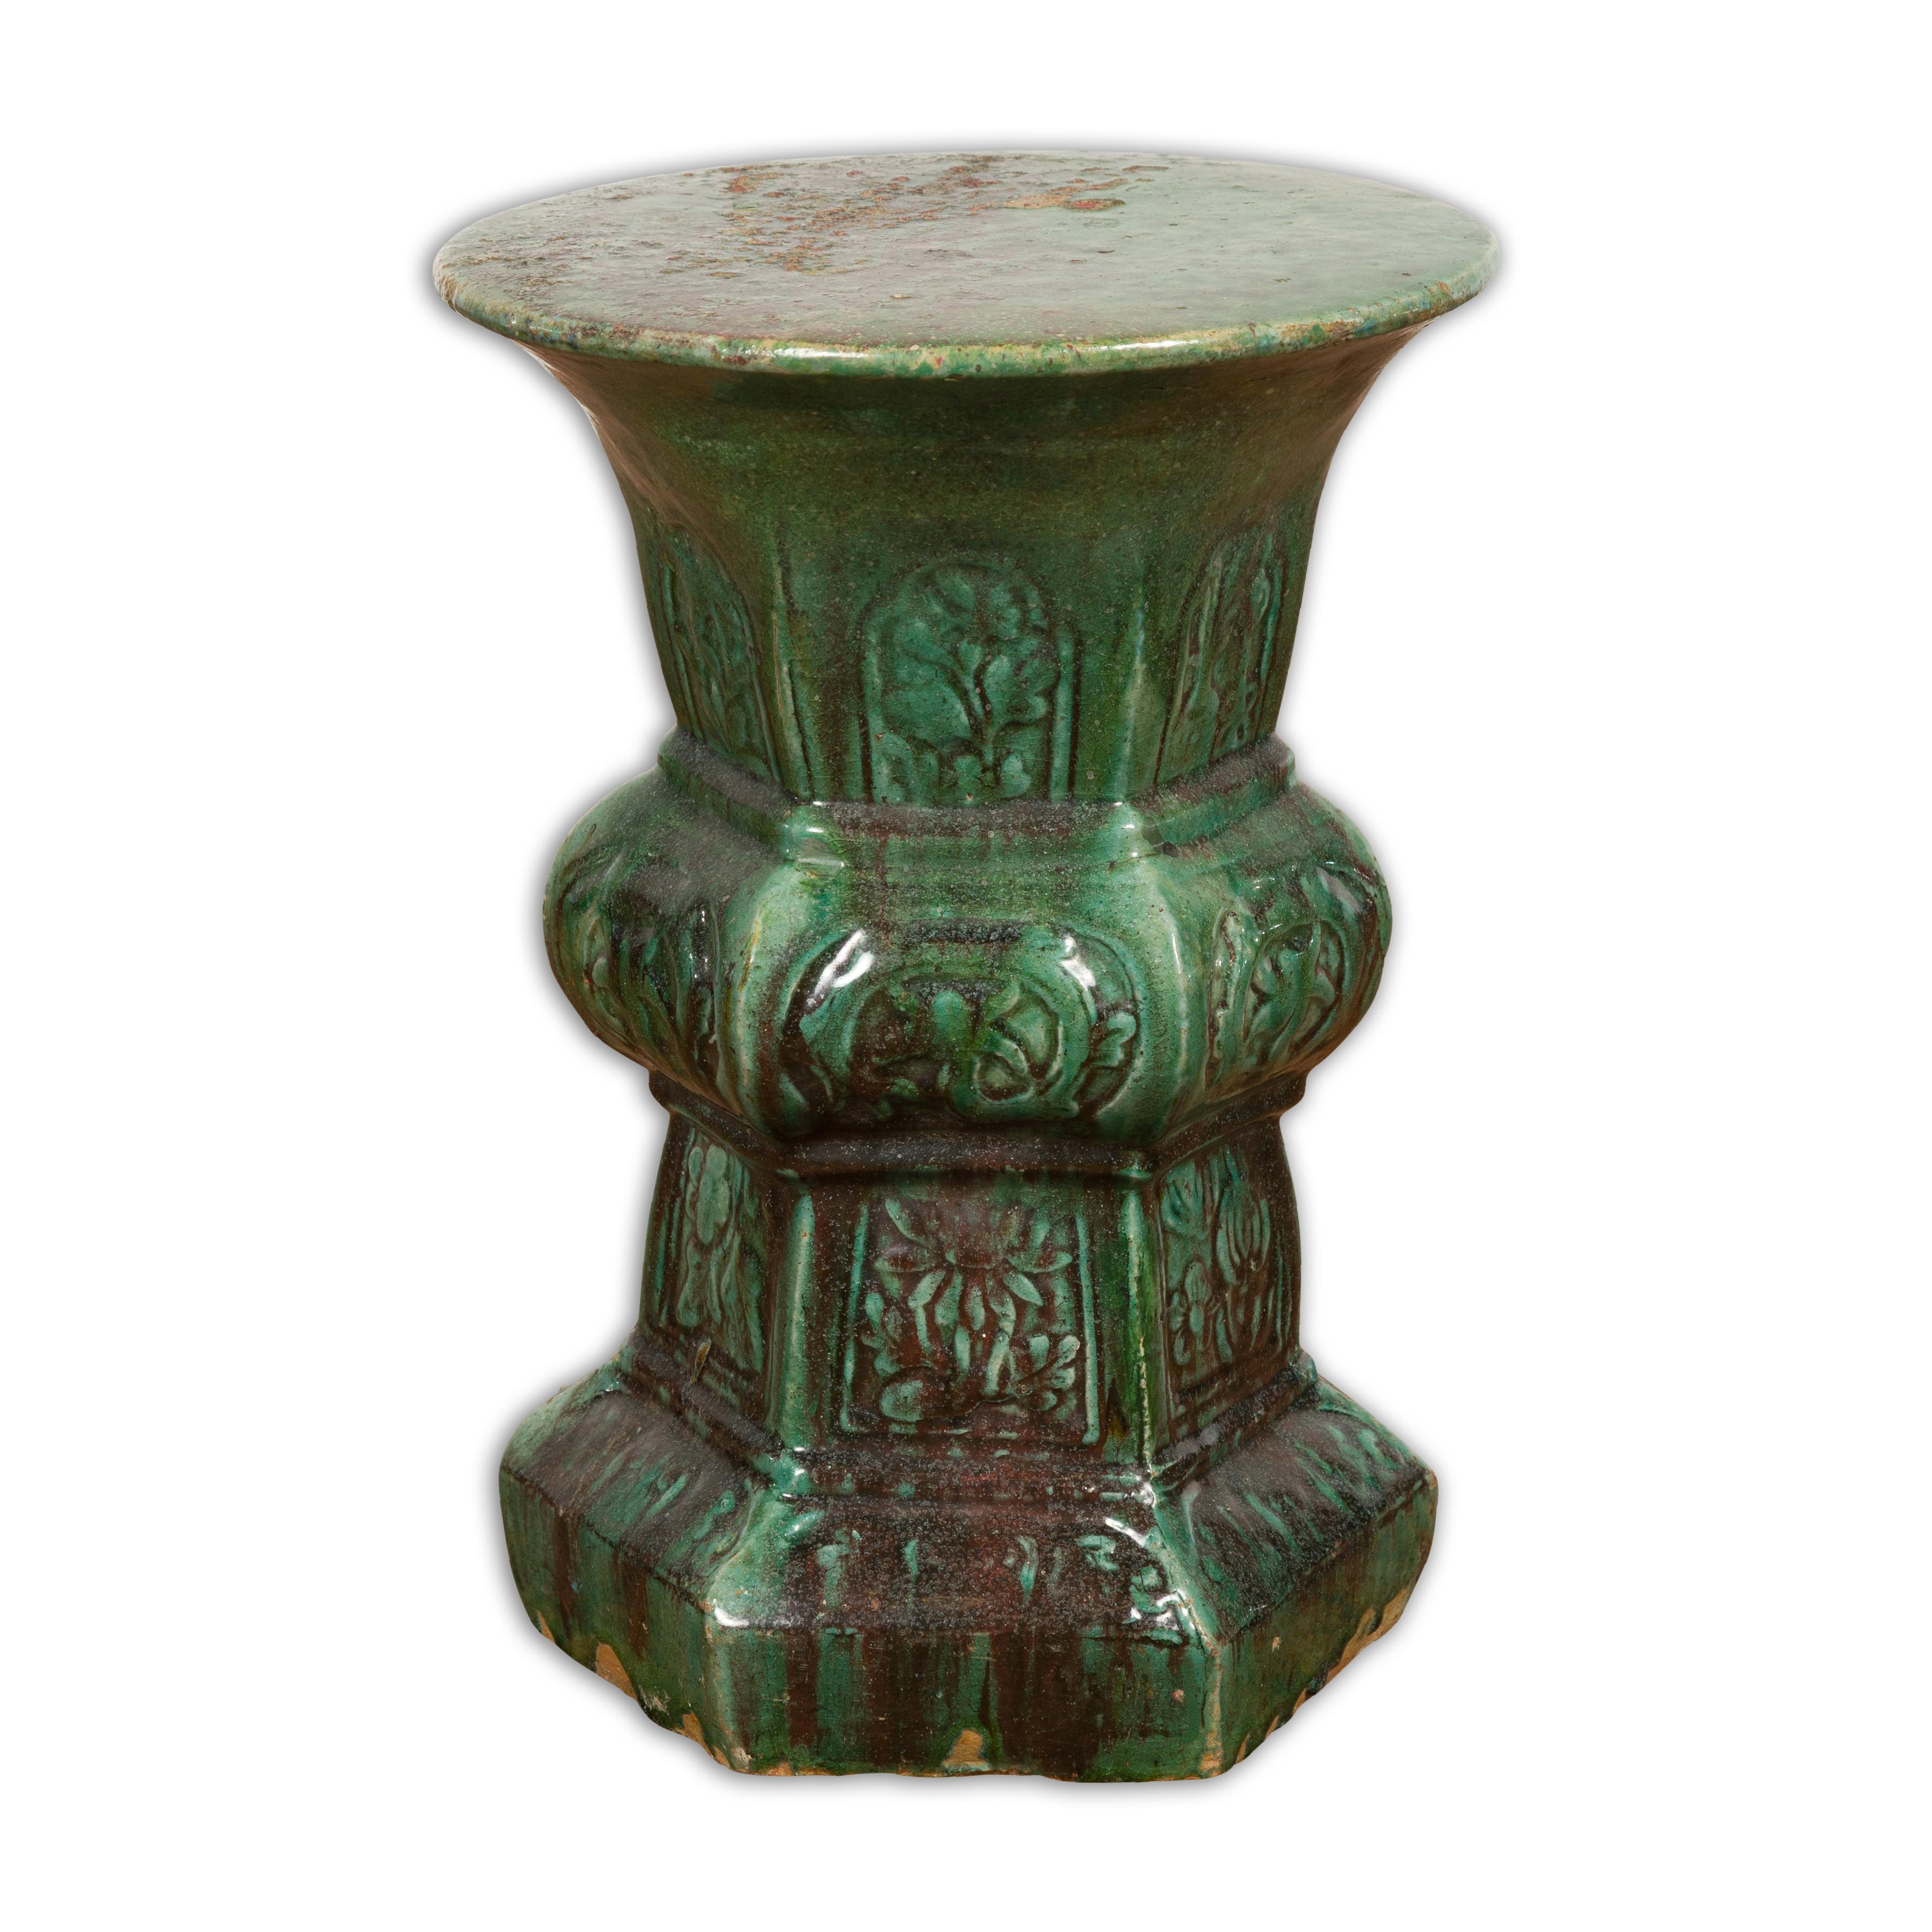 Annamese 19th Century Green Glazed Hourglass Garden Seat with Floral Décor 12